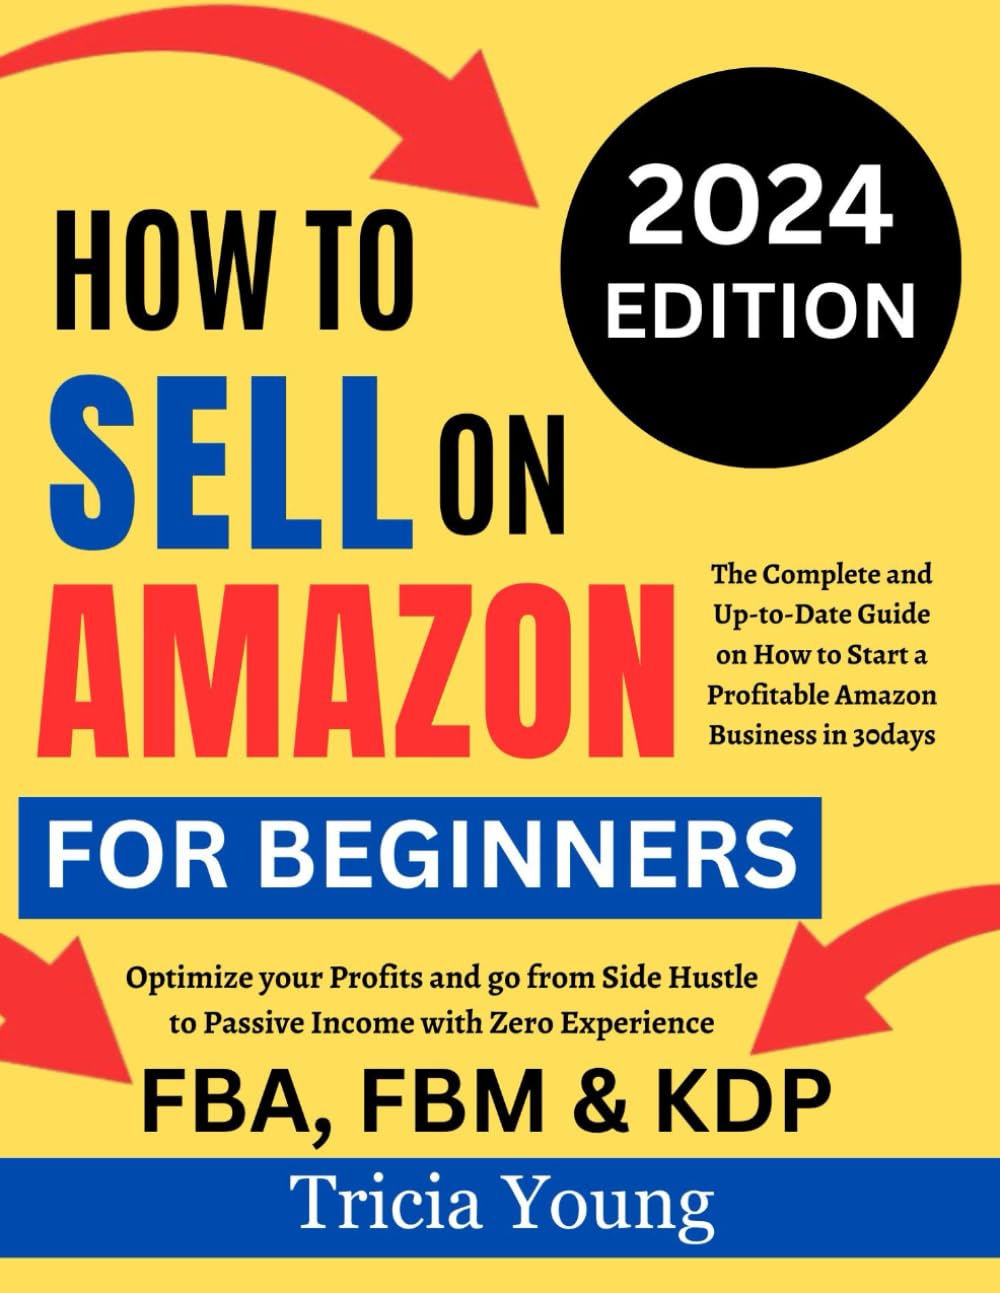 How To Sell on Amazon for Beginners, 2024 Edition: The Complete and Up-to-Date Guide on How to Start a Profitable Amazon FBA, FBM, & KDP Business In ... Hustle to Passive Income with Zero Experience